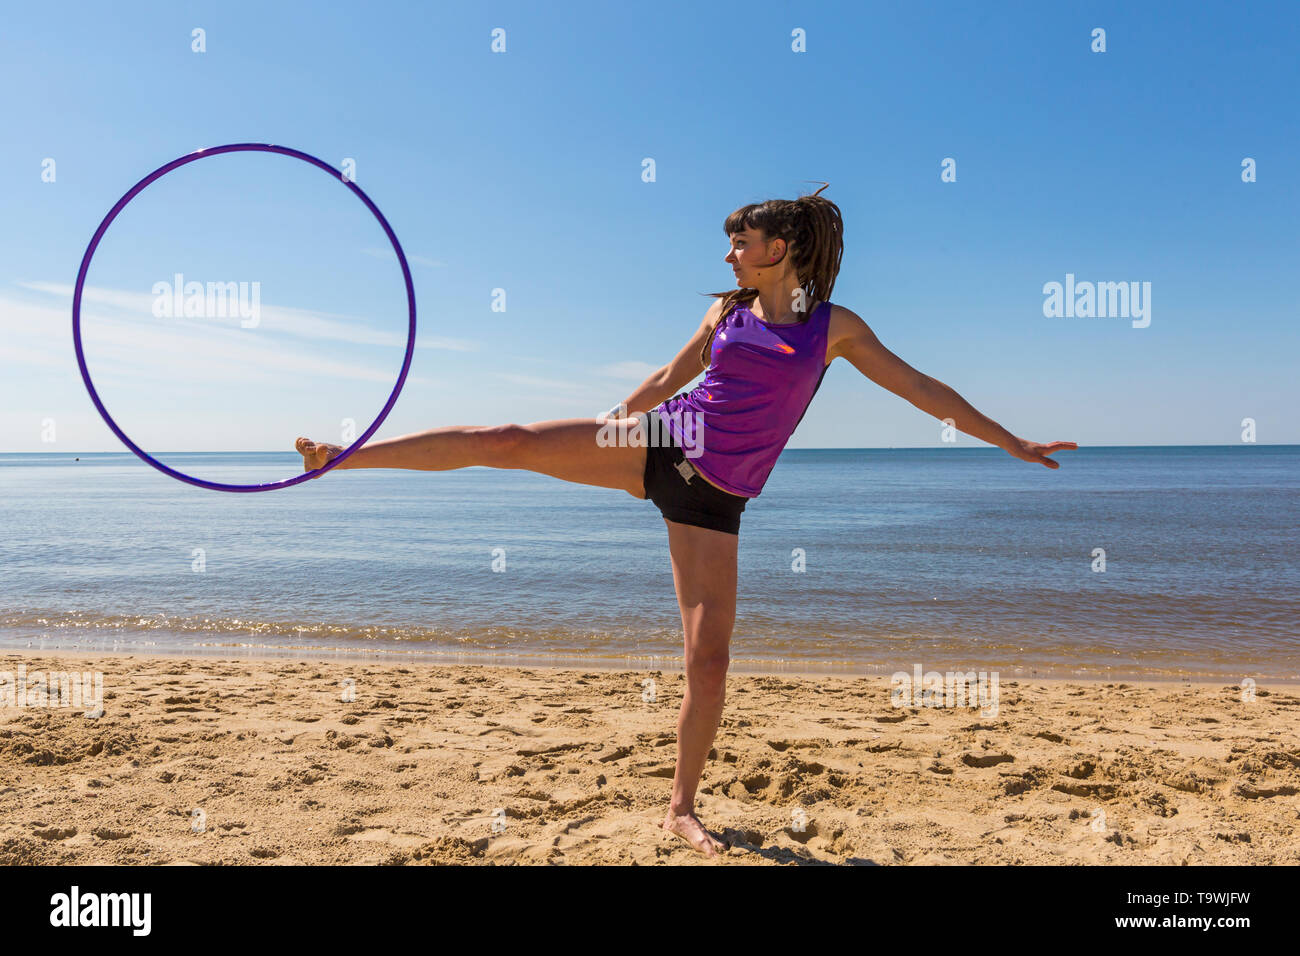 Southbourne, Bournemouth, Dorset, UK. 21st May, 2019. UK weather: lovely warm sunny morning as Lottie Lucid performs her hula hooping routine on the beach at Southbourne, enjoying the warm sunny weather in her hot pants. Credit: Carolyn Jenkins/Alamy Live News Stock Photo